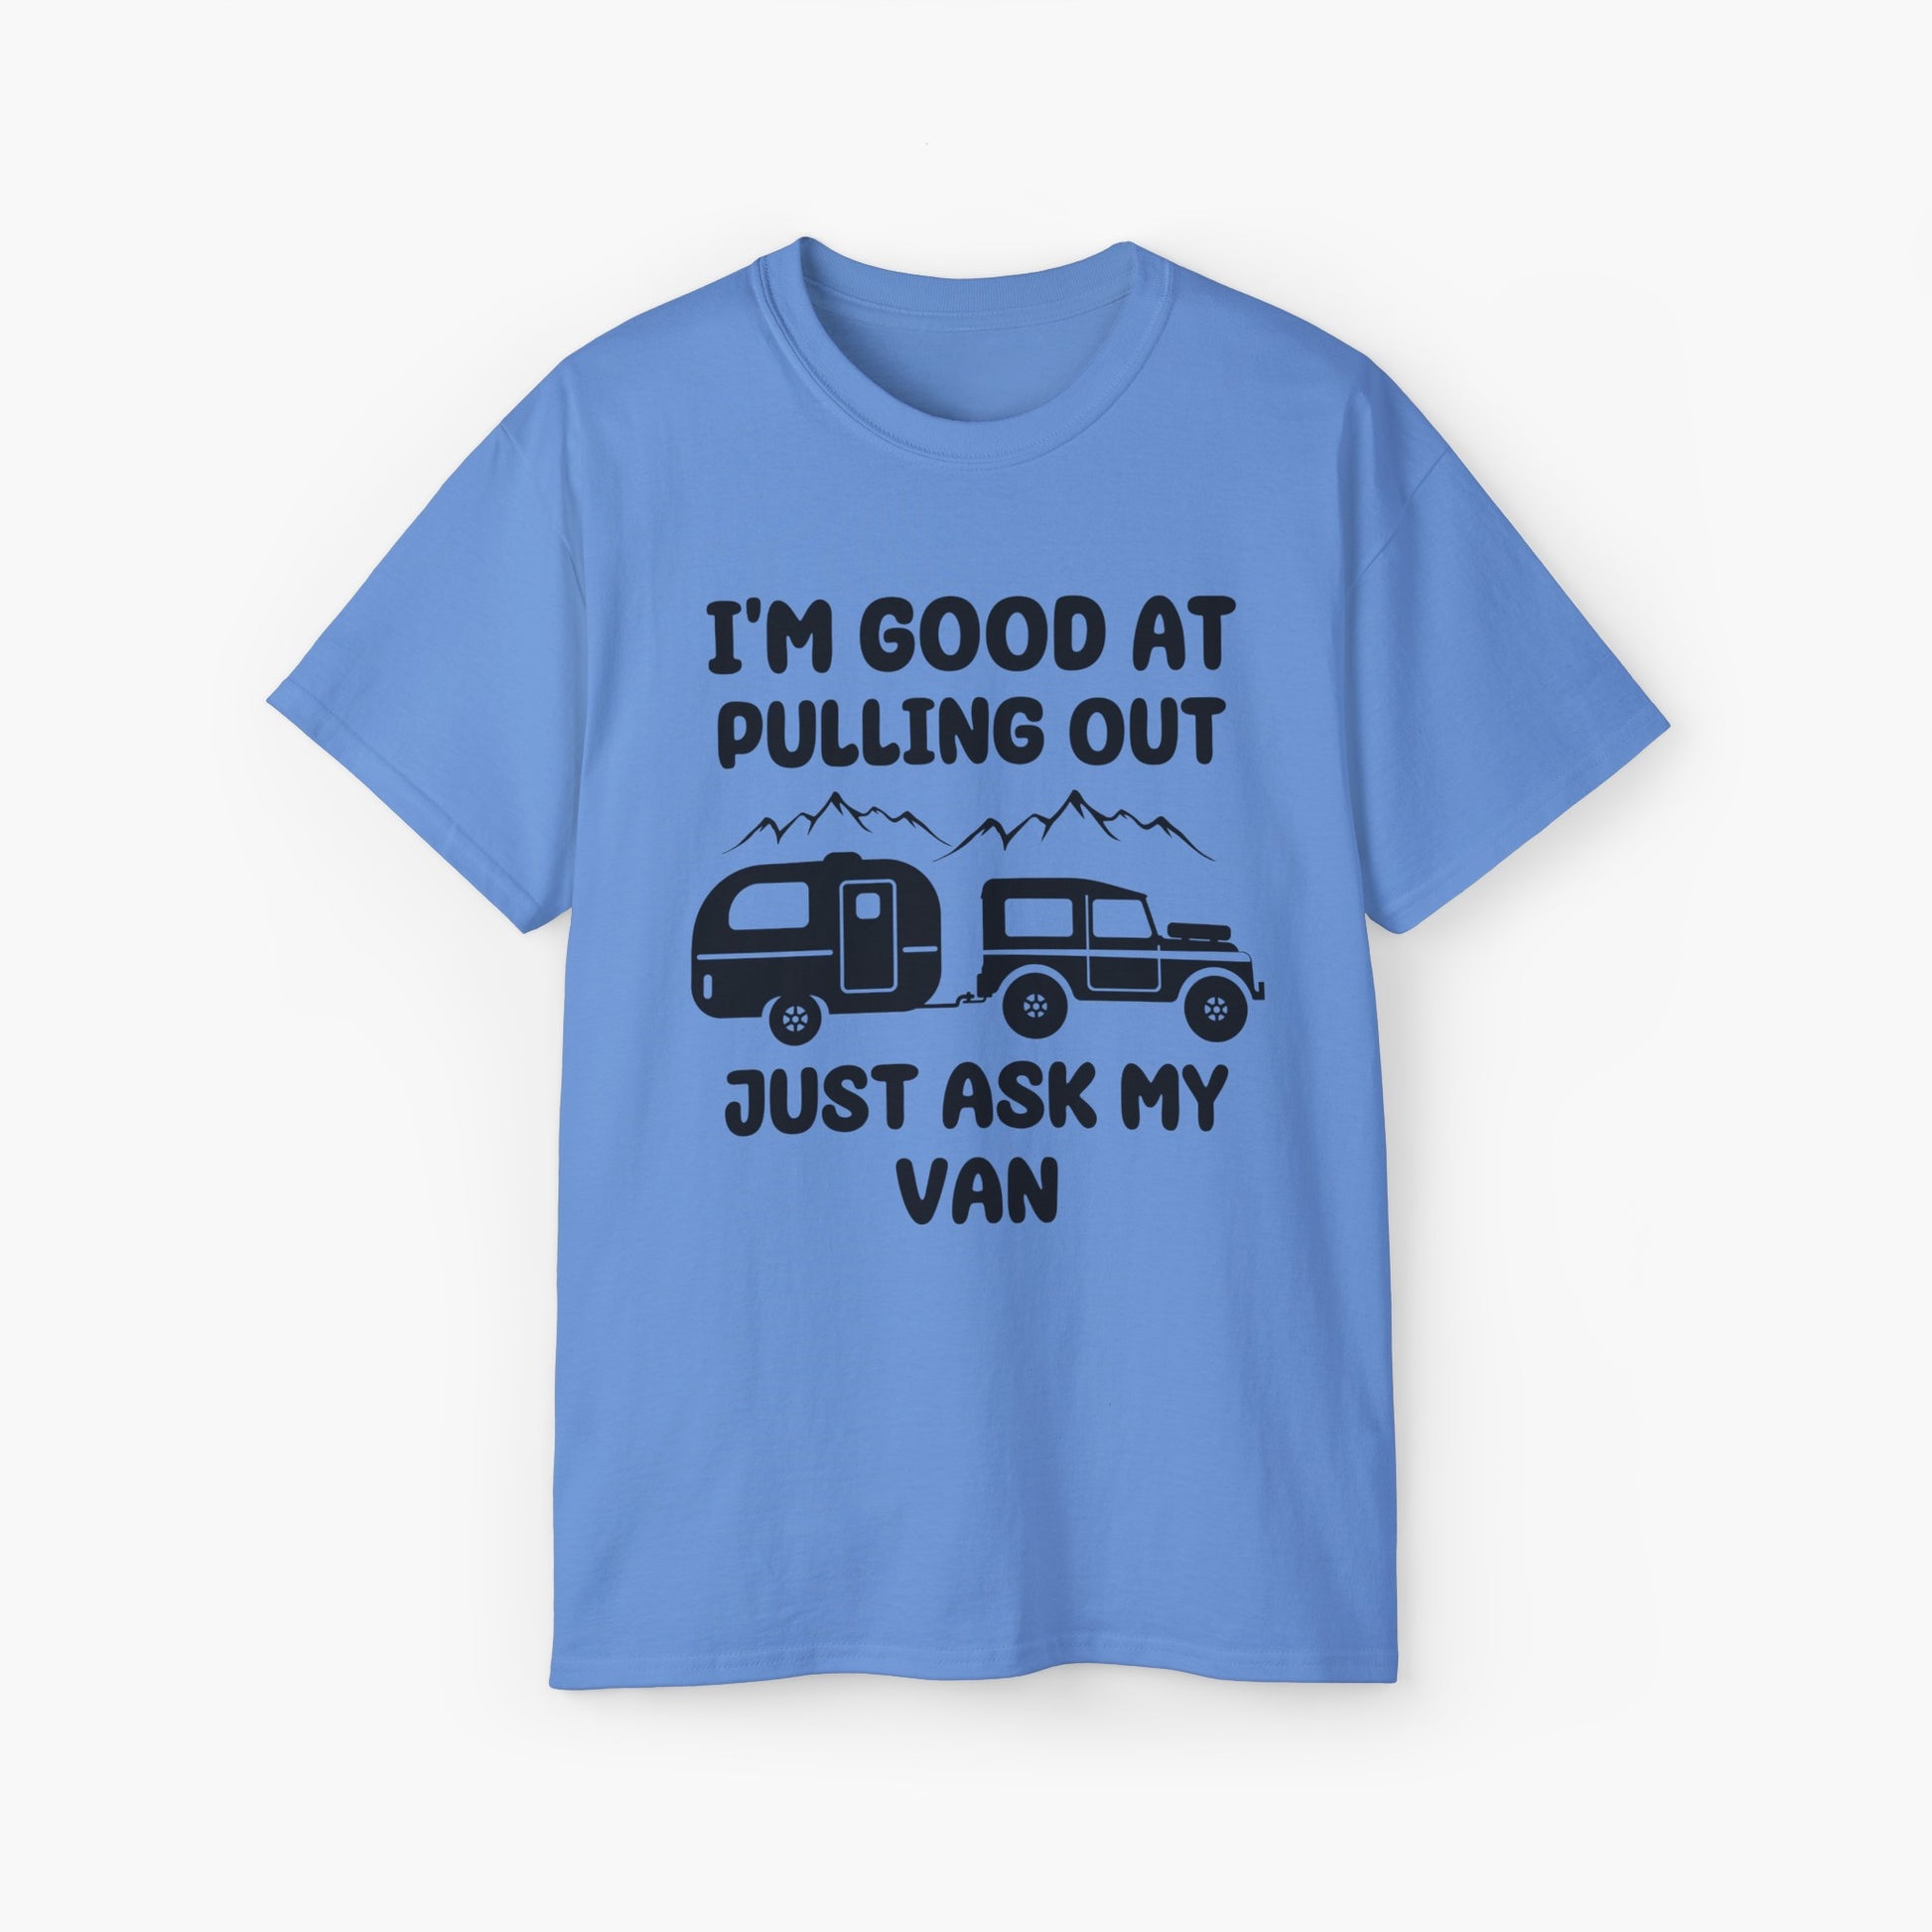 Blue t-shirt with humorous text 'I'm good at pulling out, just ask my van,' featuring an image of a truck pulling a camping van, set against mountains on a plain background.